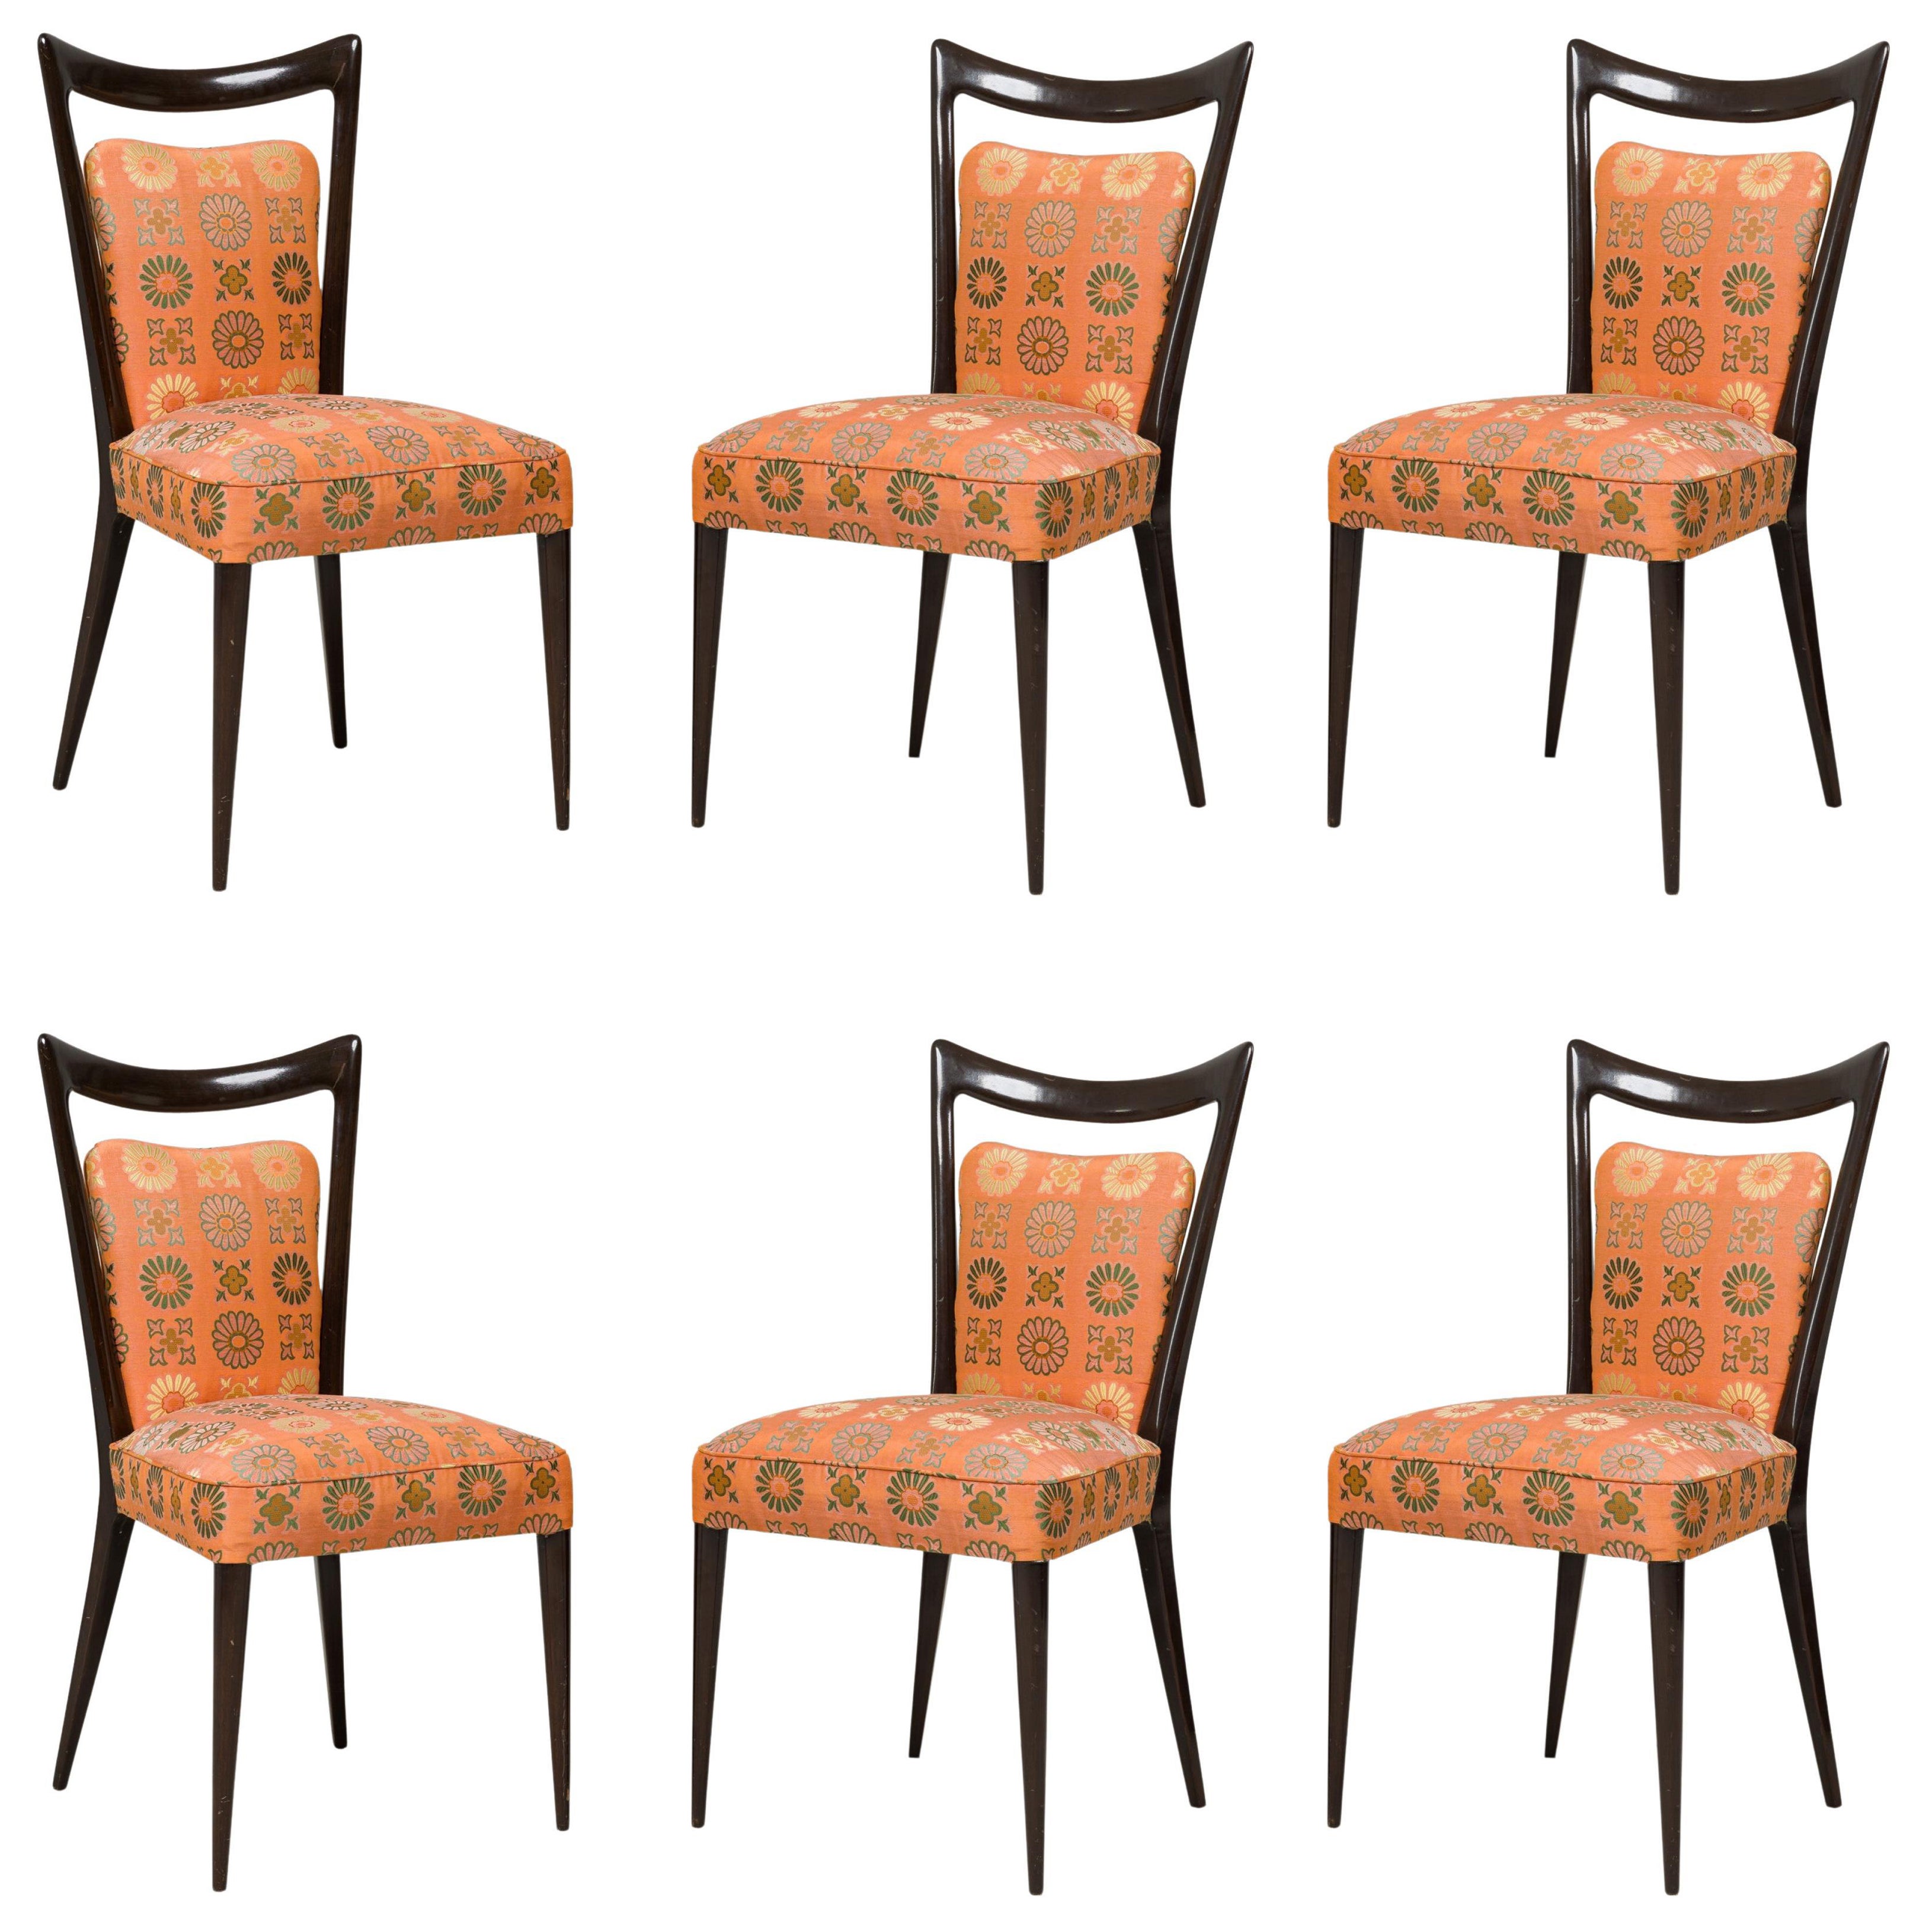 Set of 4 Melchiorre Bega Mid-Century Italian Zigzag Upholstered Dining Chairs For Sale